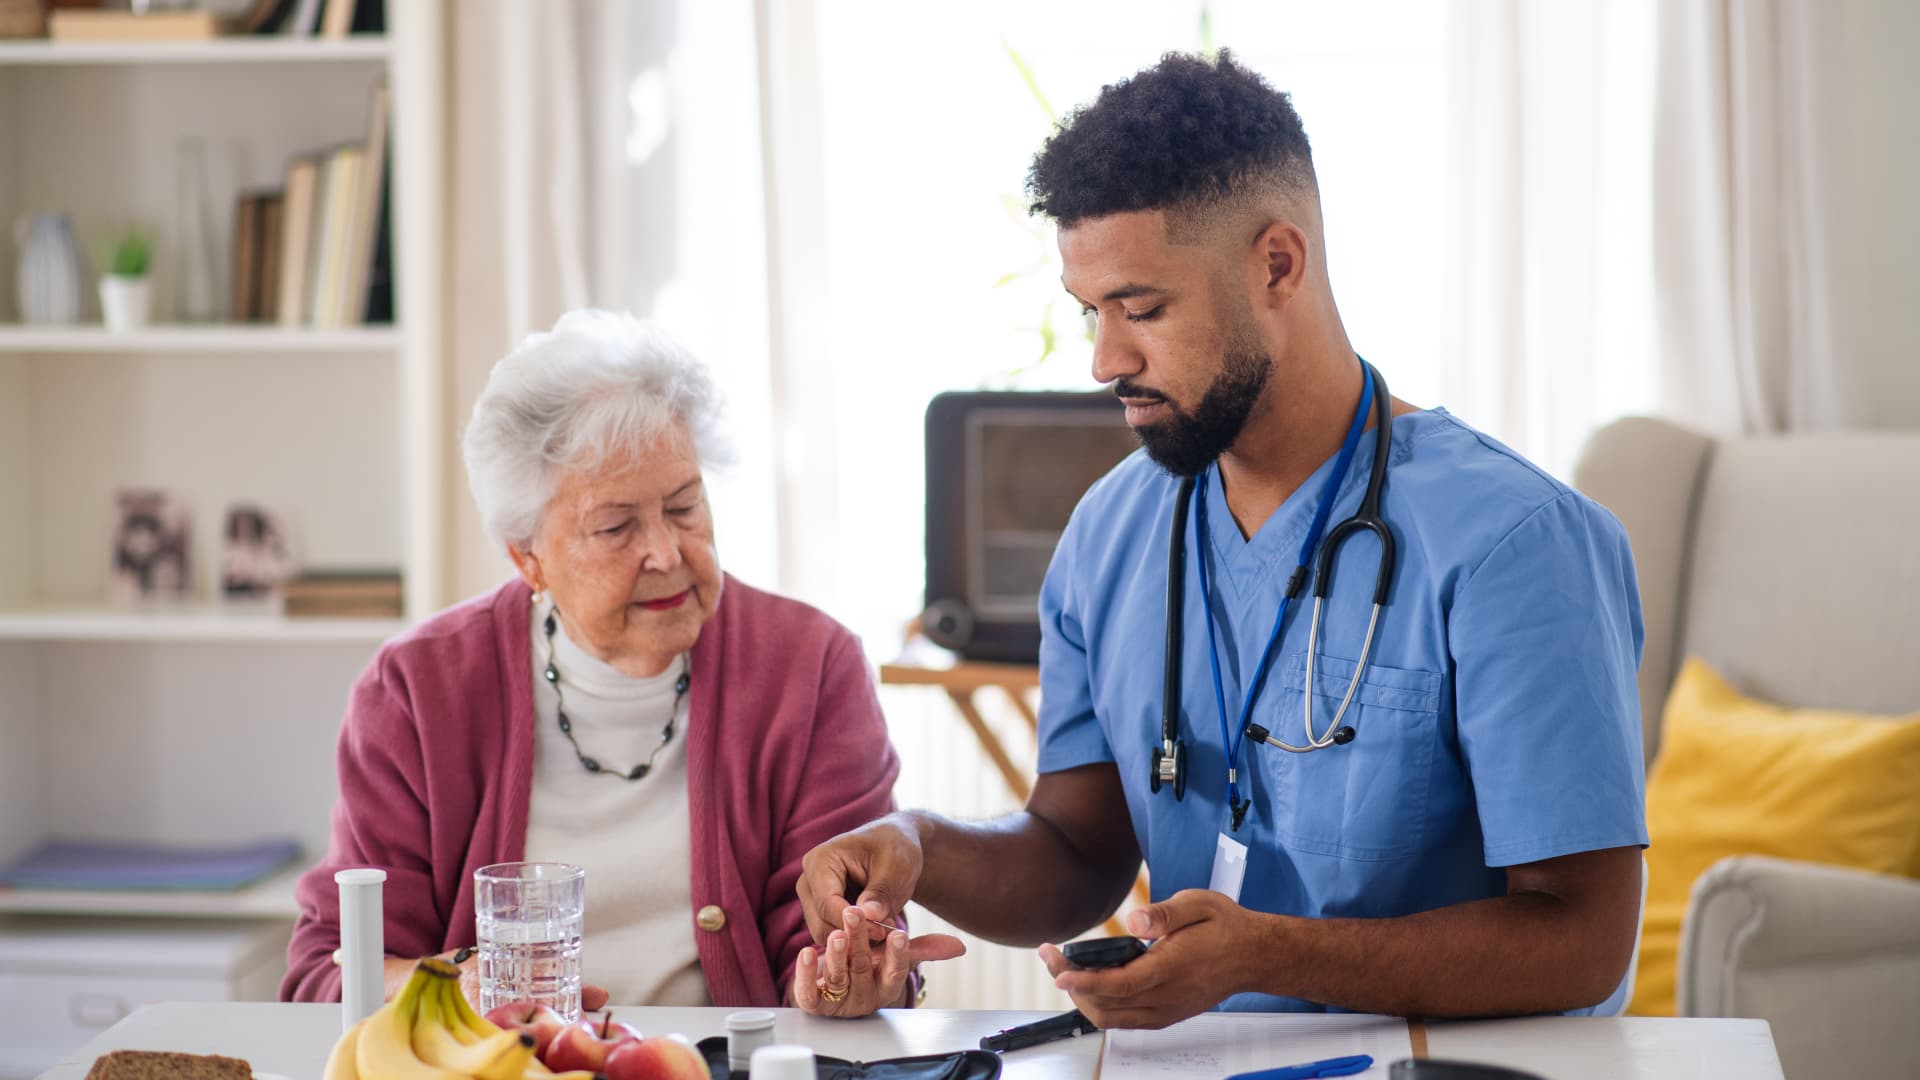 Here's how those looking to 'age in place' can fund home health-care services